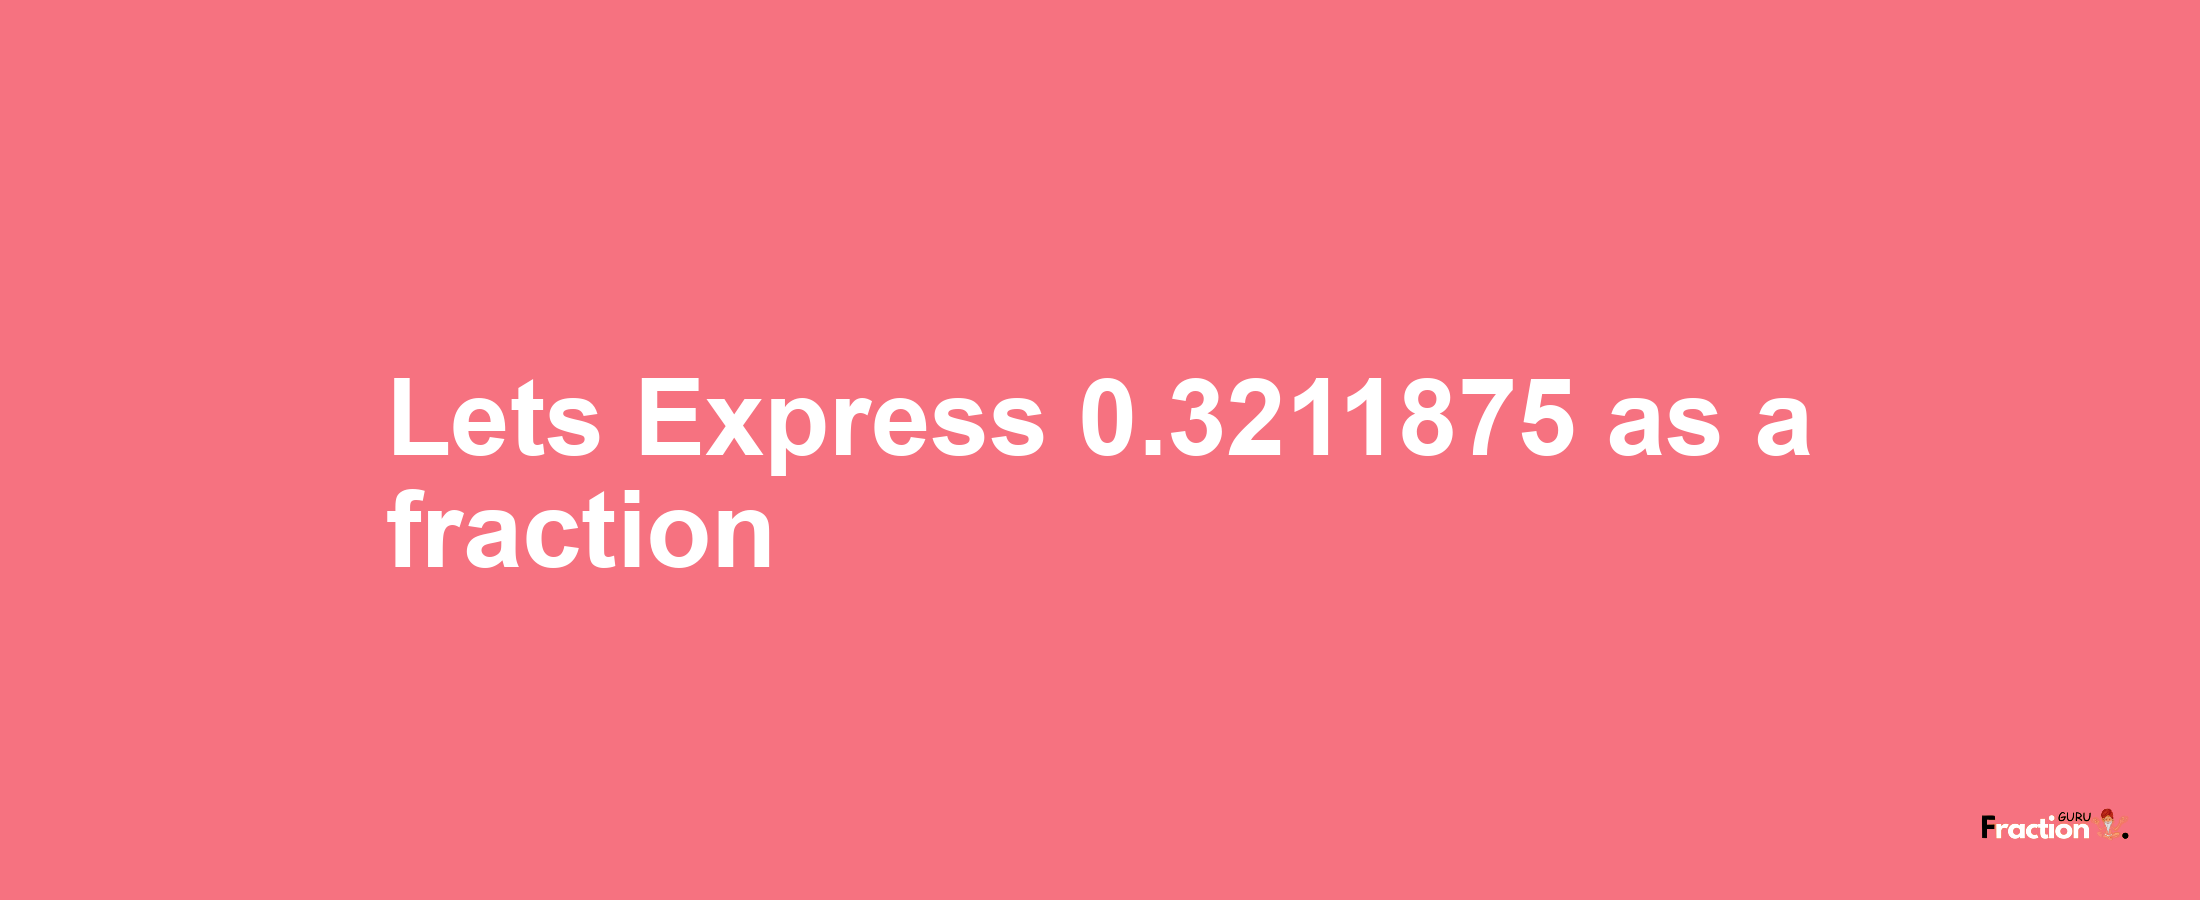 Lets Express 0.3211875 as afraction